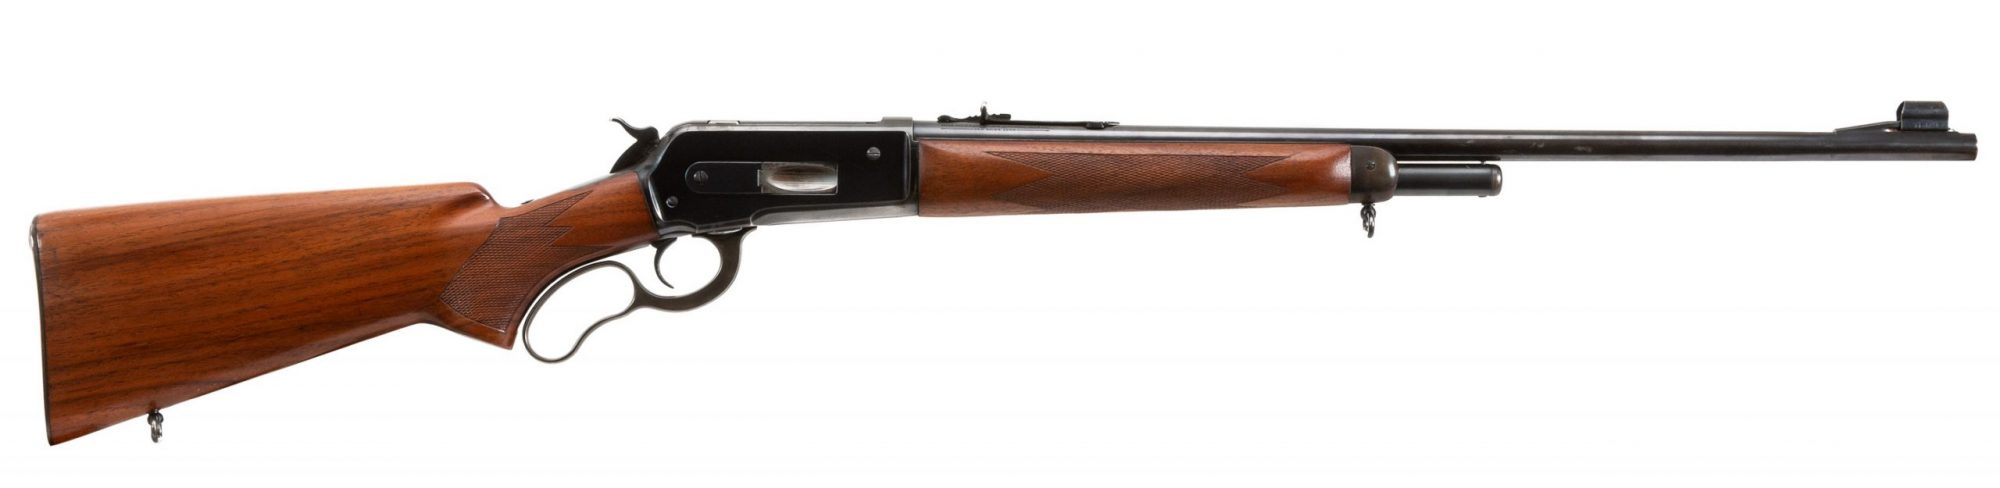 Photo of a pre-owned Winchester Model 71 from 1941, for sale by Turnbull Restoration of Bloomfield, NY